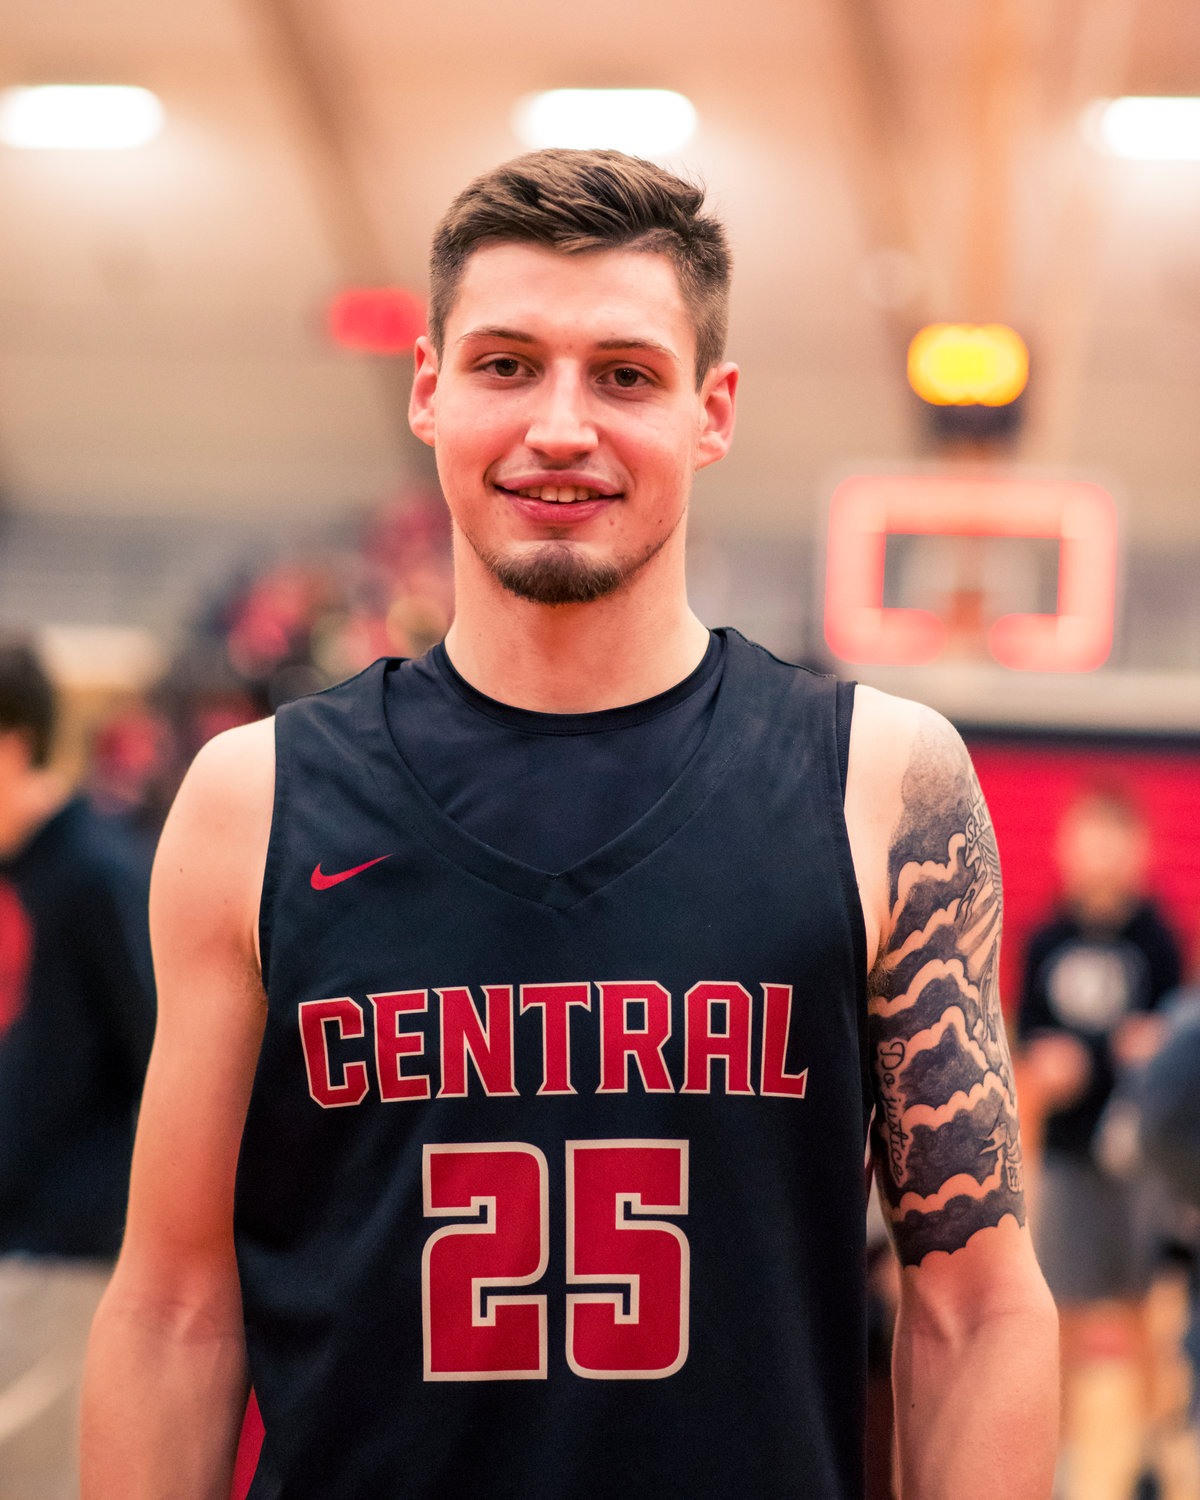 Central's Matt Poquette (25) poses for a photo during a game Thursday night at Saint Martin's University.